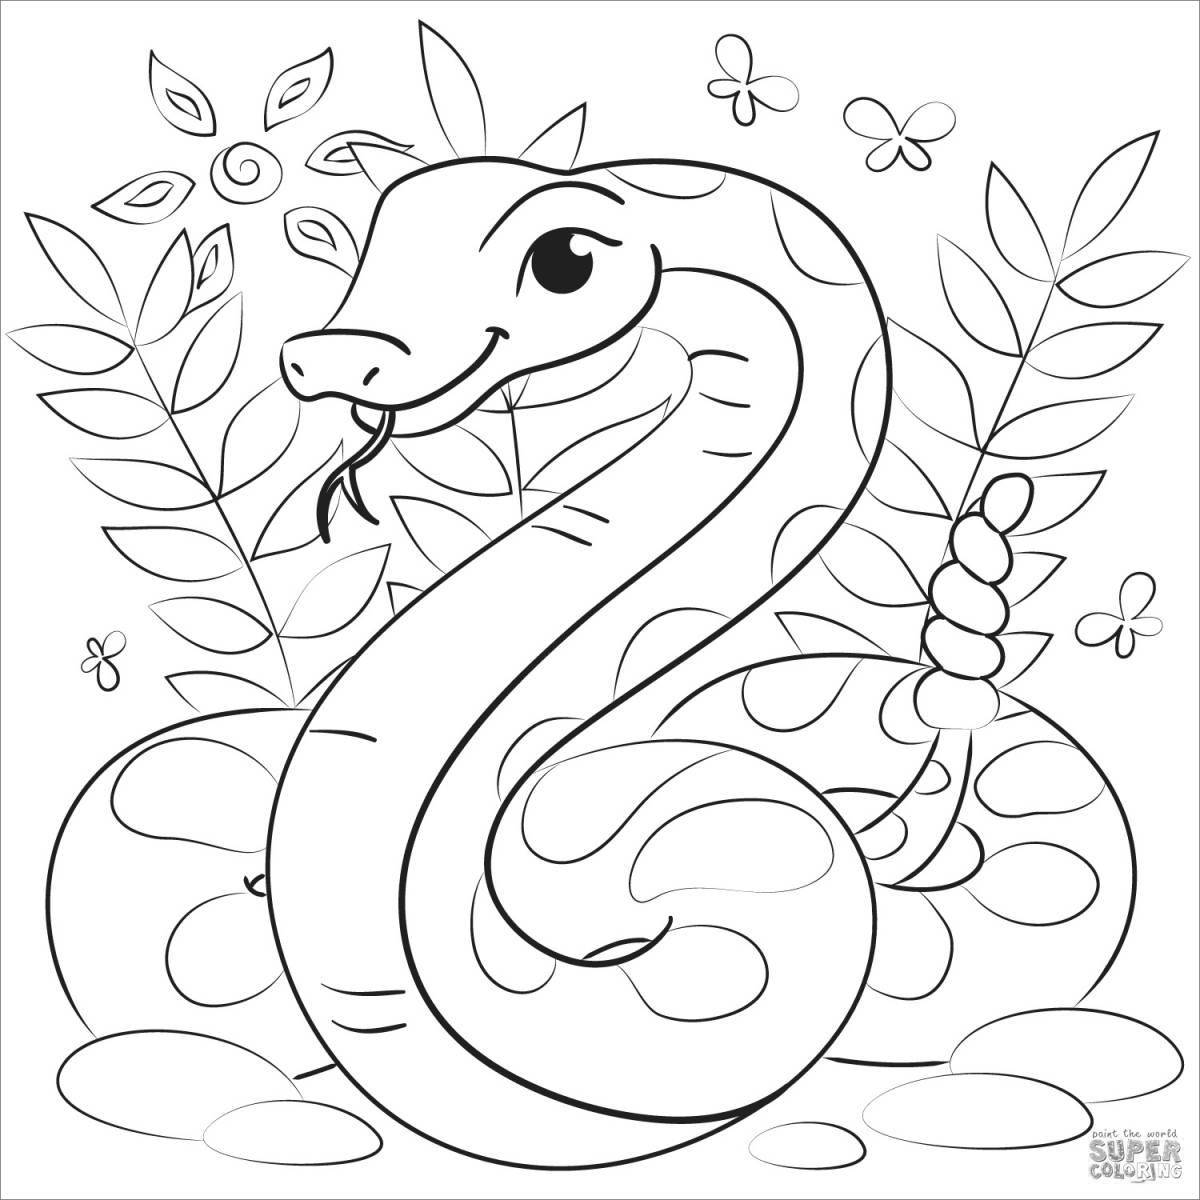 Colorful blue snake coloring book